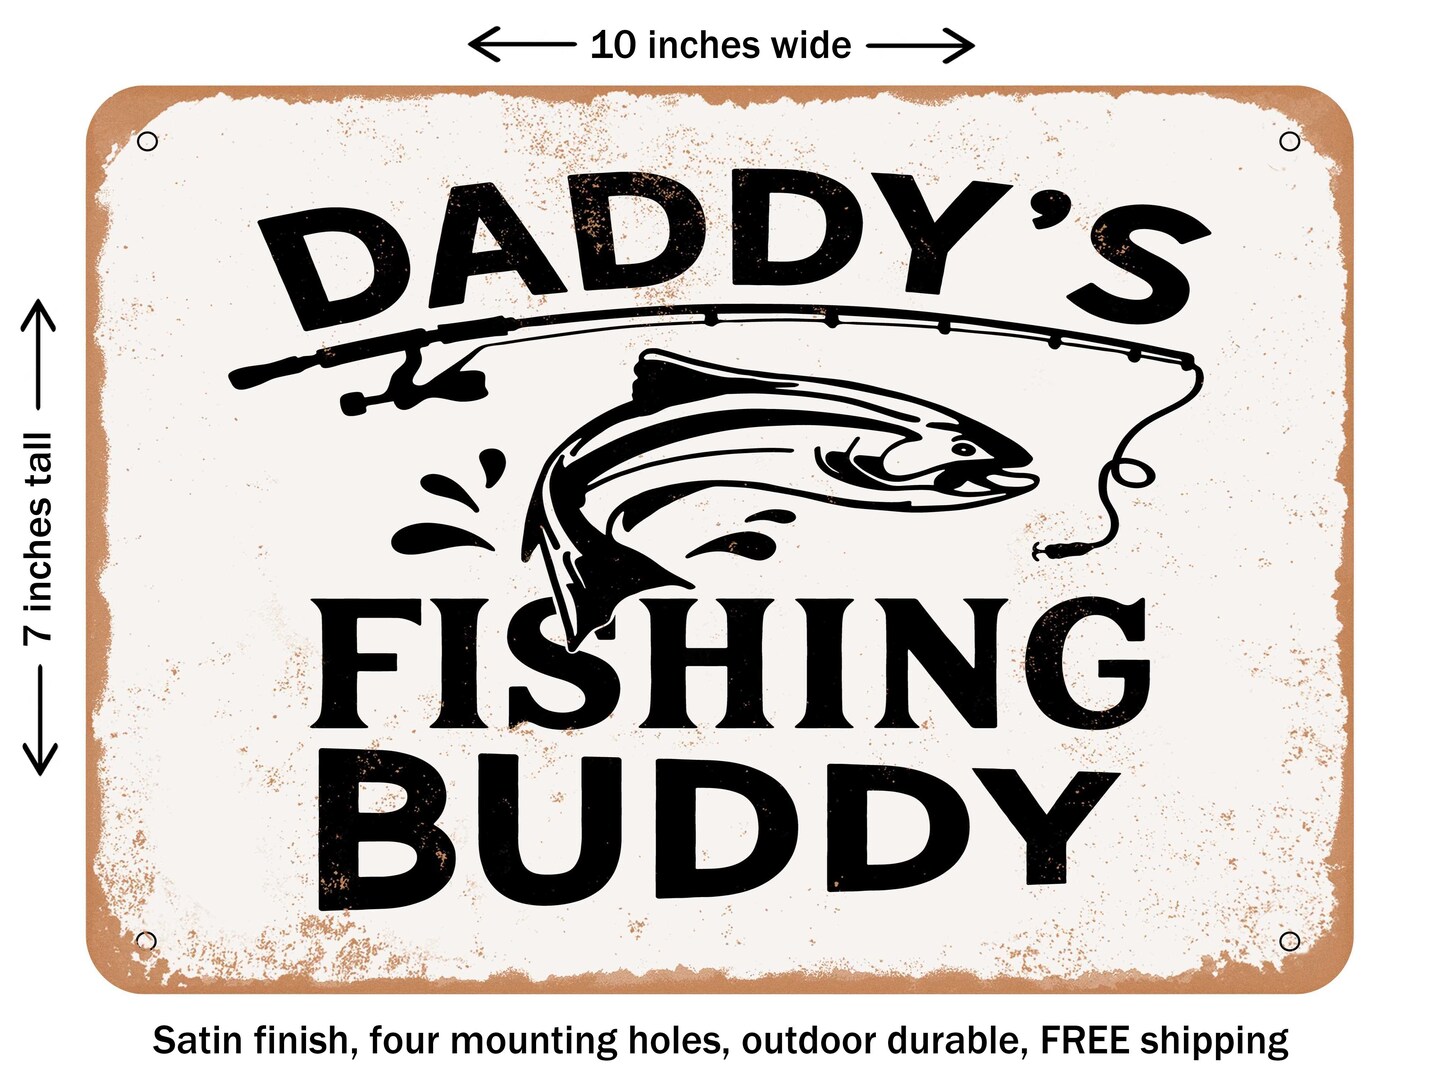 DECORATIVE METAL SIGN - Daddy&#x27;s Fishing Buddy - 3 - Vintage Rusty Look